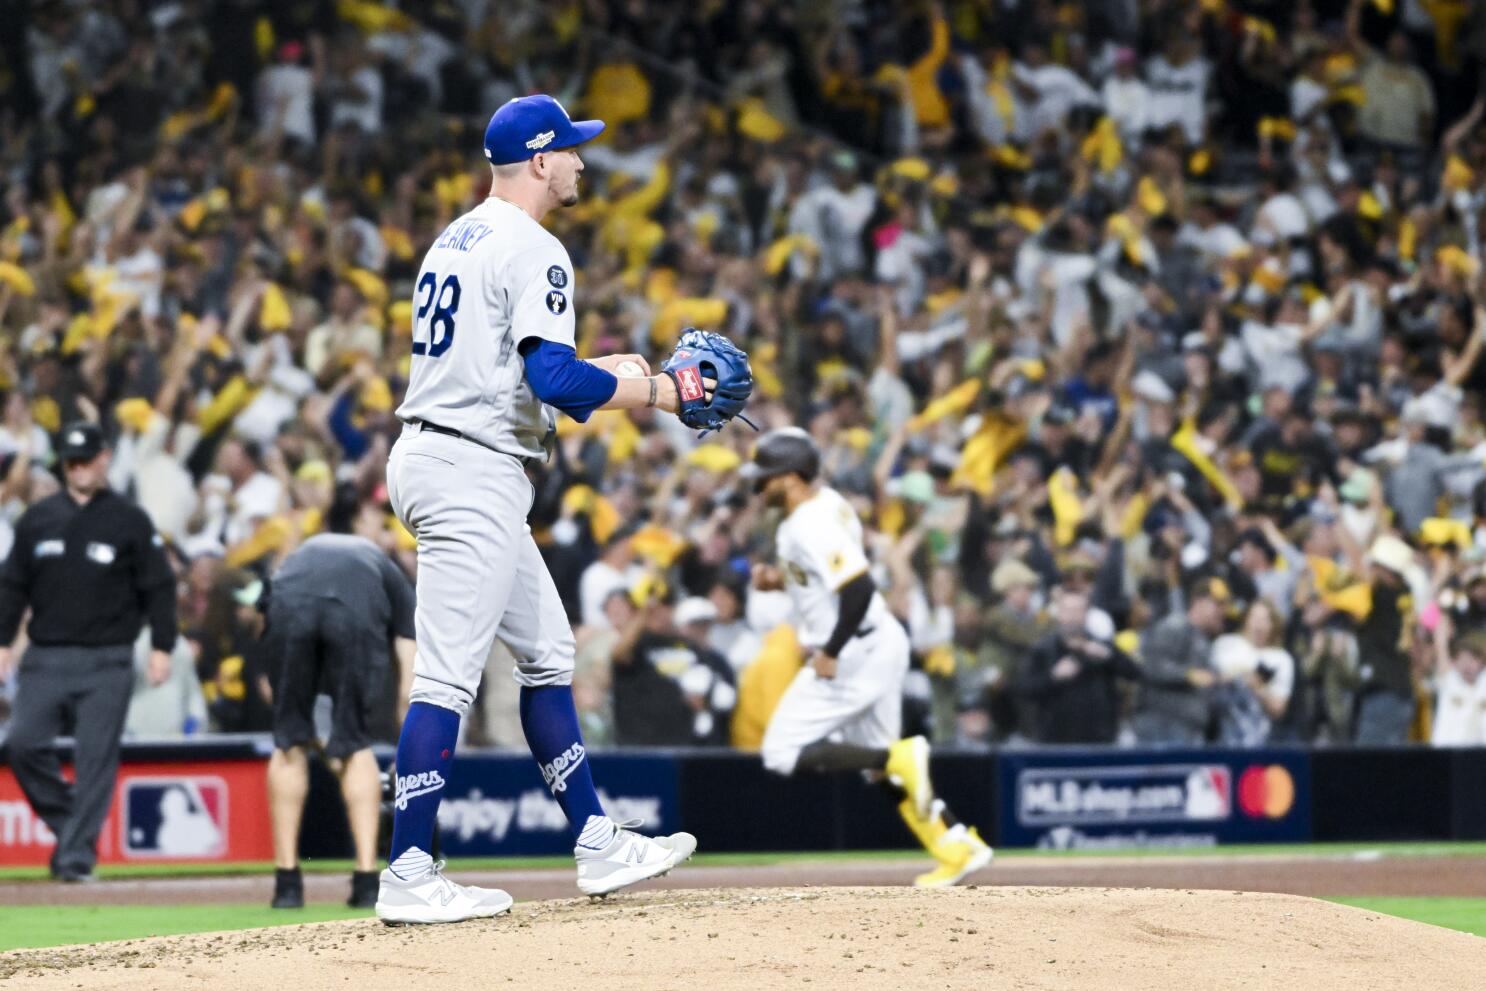 Andrew Heaney's postseason debut for Dodgers spoiled by home run